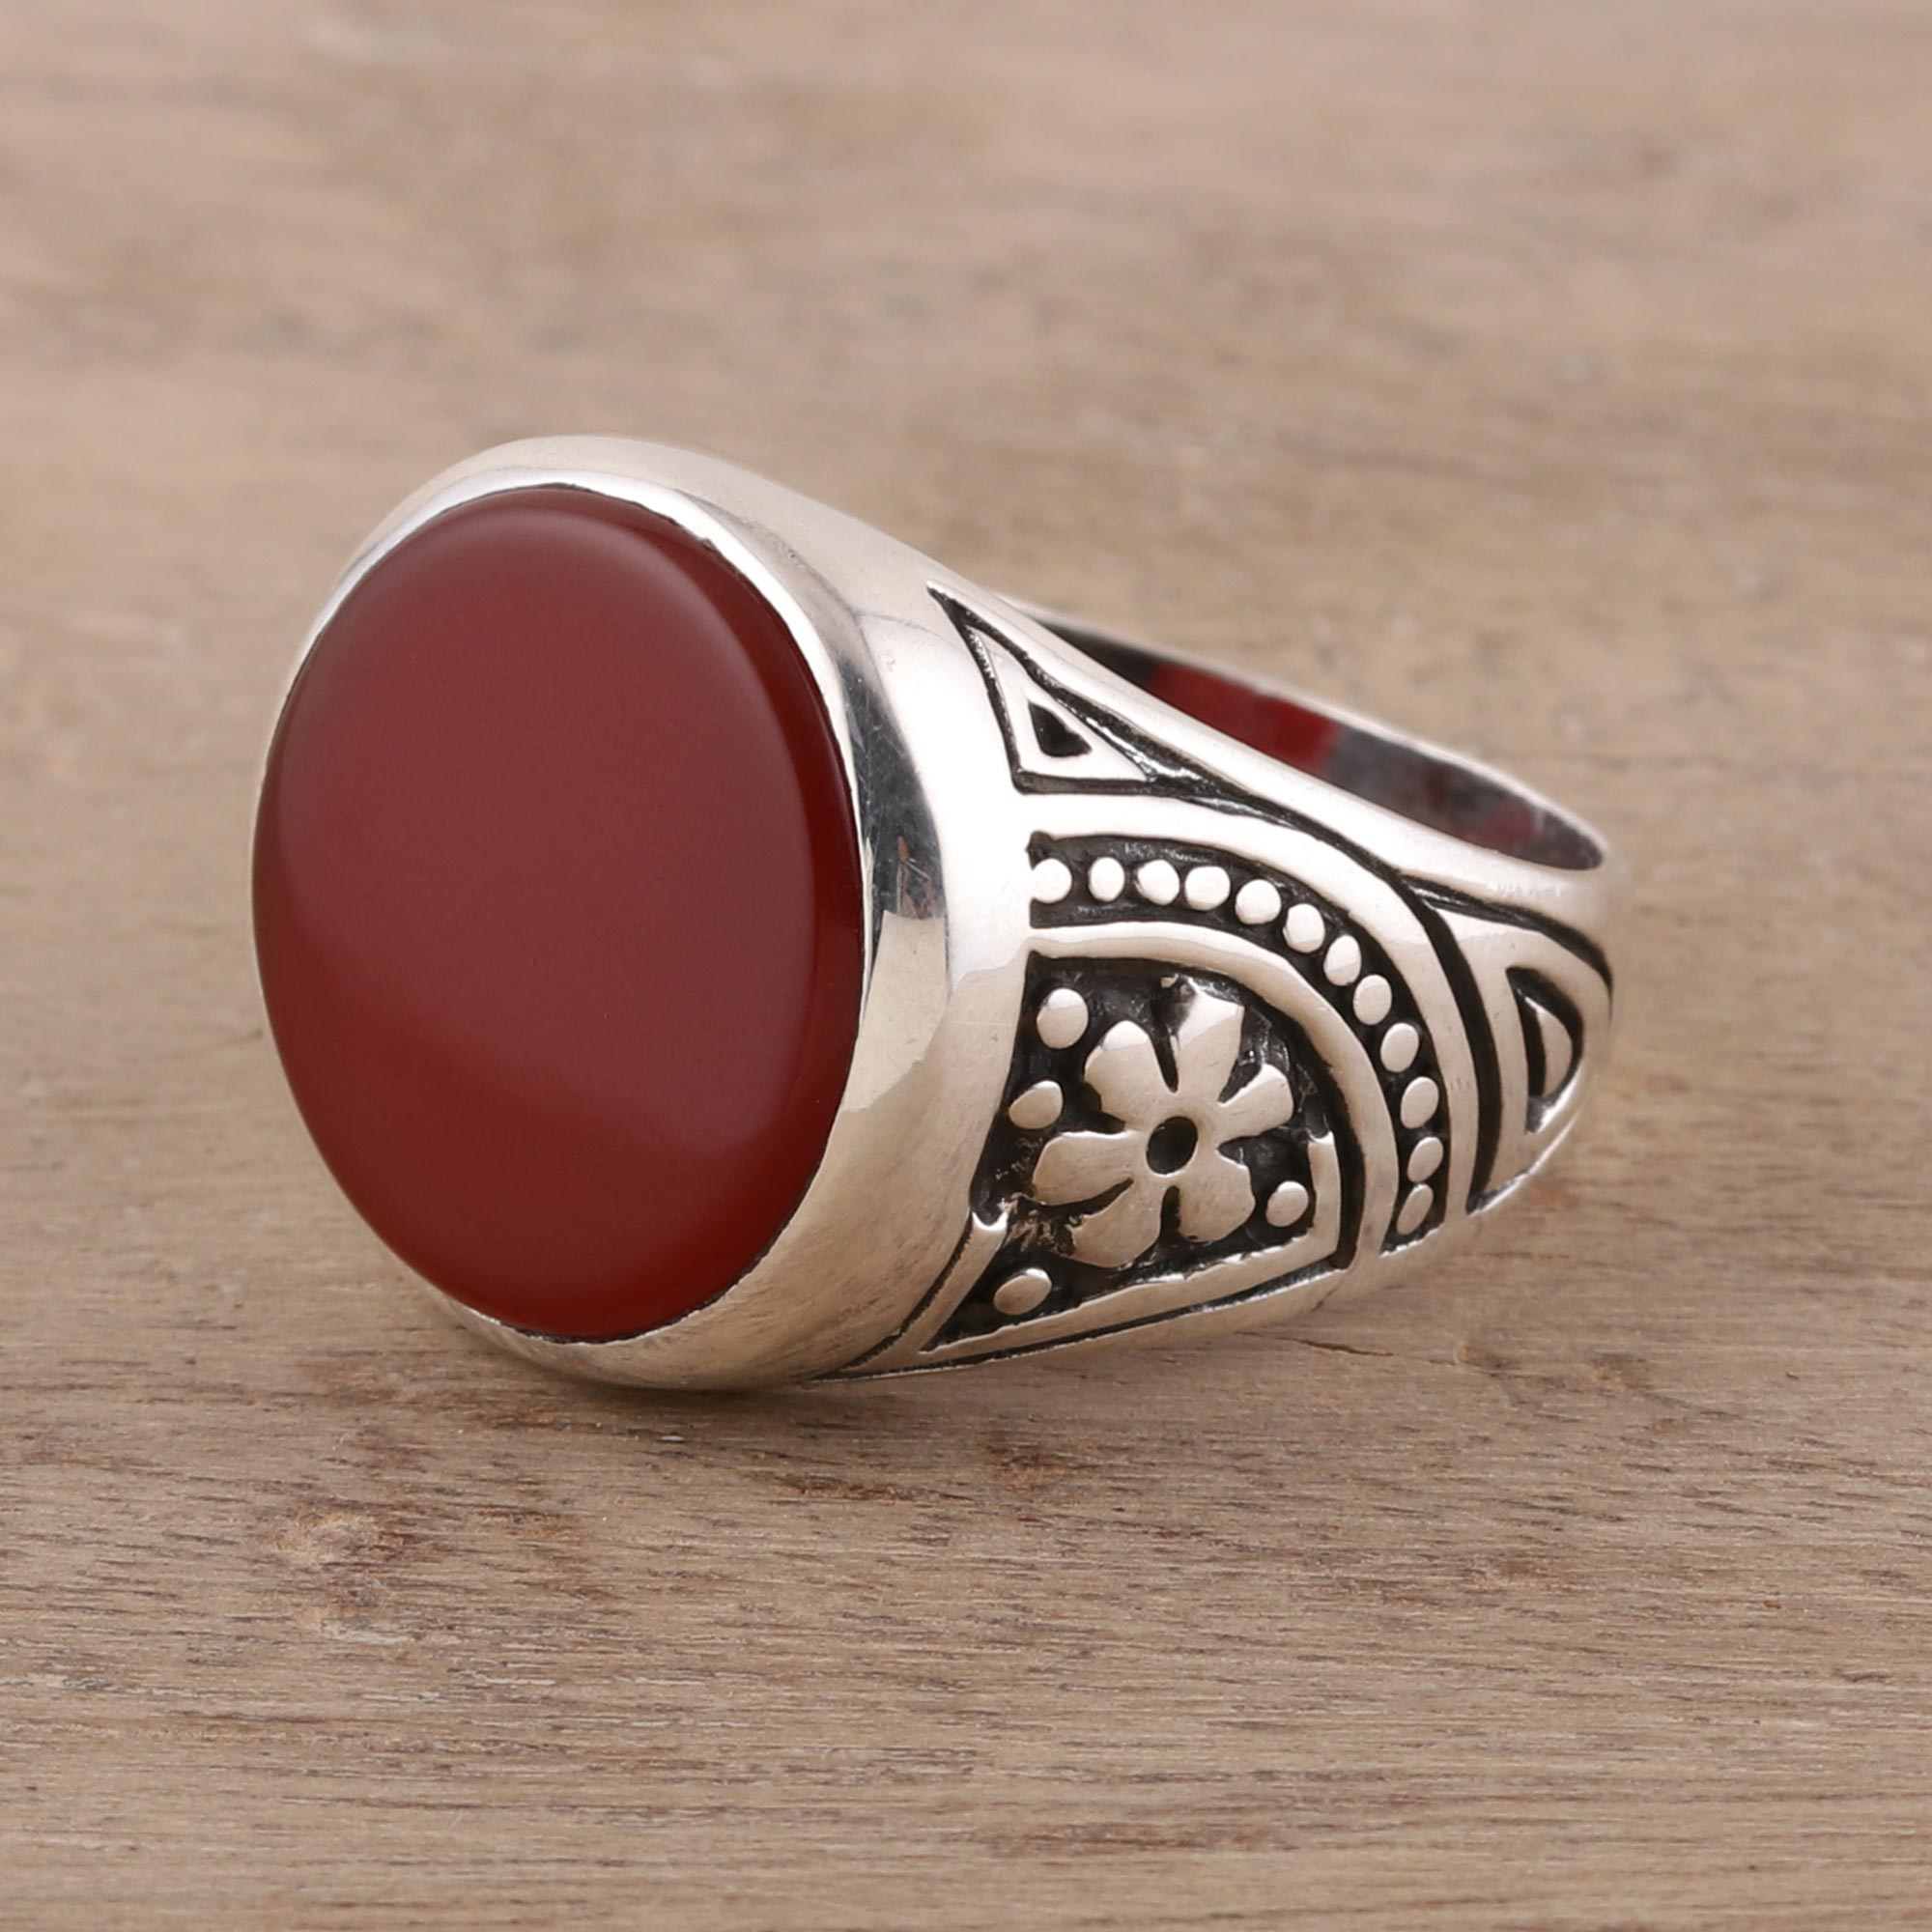 Details about   925 Sterling Silver Hallmark Natural Carnelian Ring Festival Ring Gift RS-1190 